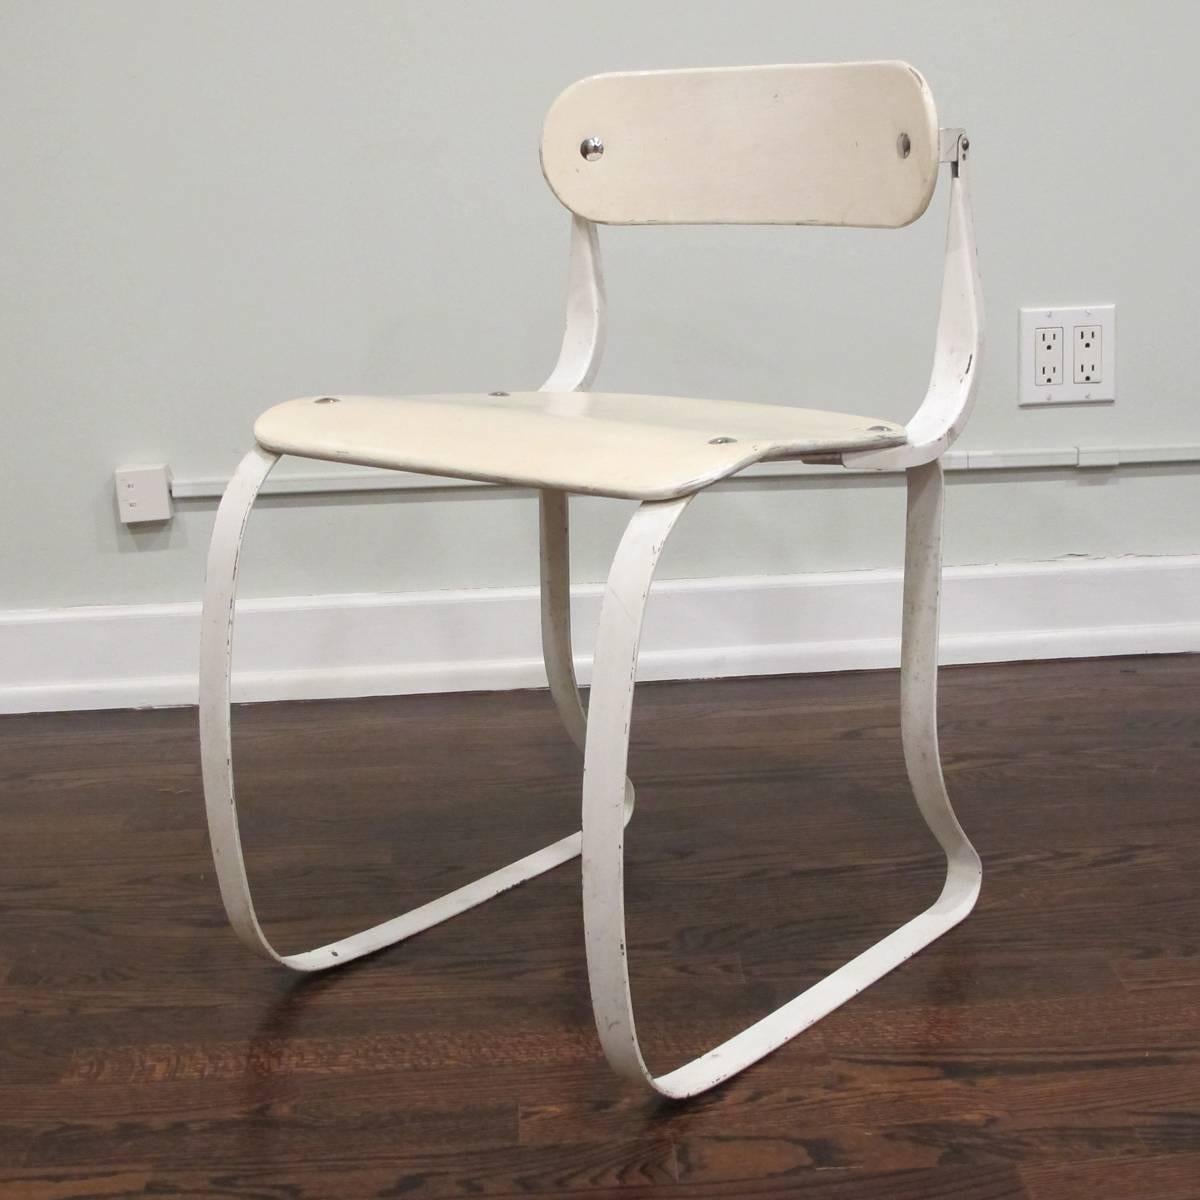 Iconic white-painted wood and steel side chair with pivoting back designed by Herman Sperlich in 1938. The chair has a mostly-original white painted finish but has been touched up at some point. There are minor cracks to the plywood seat visible in